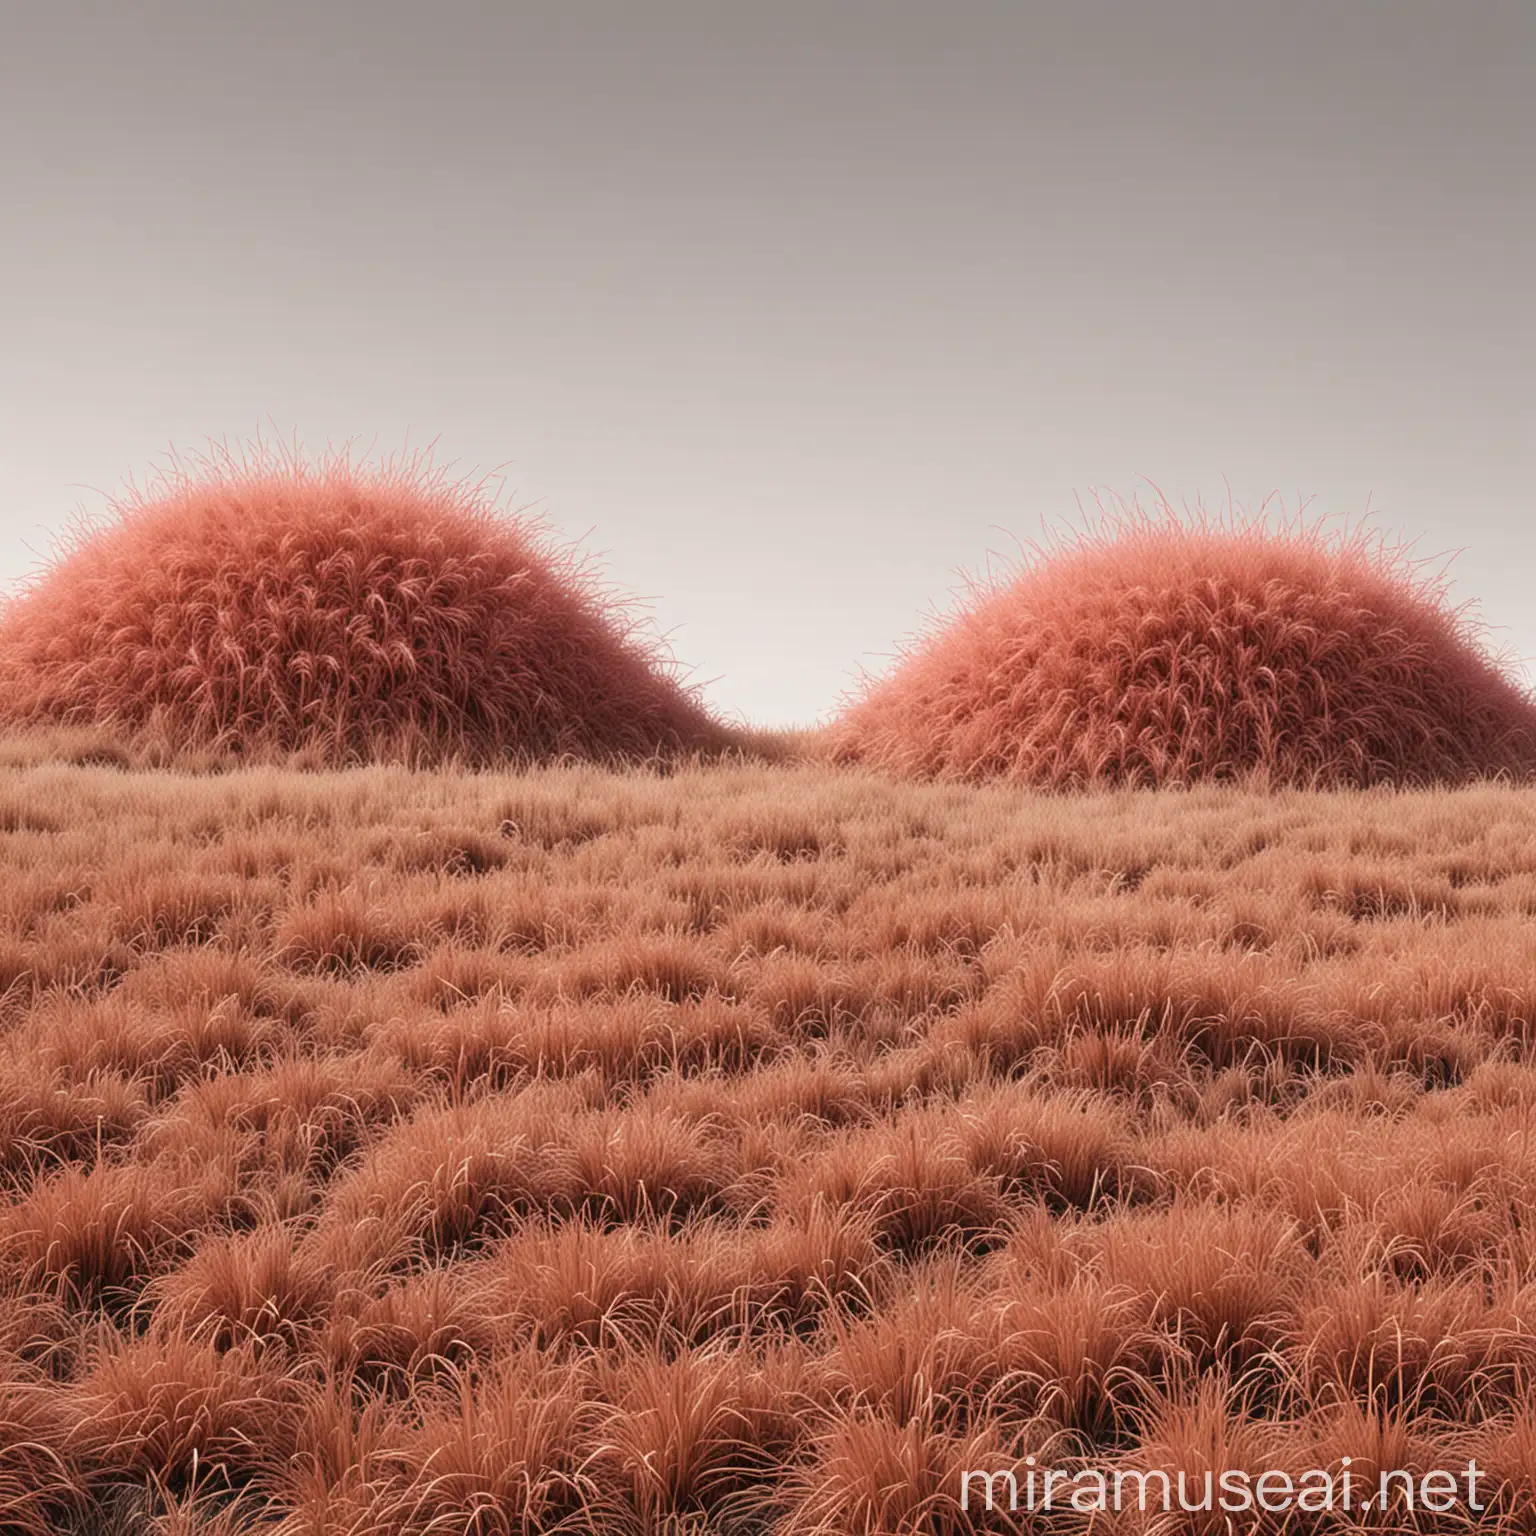 Realistic Drawing of WellCut Grass Piles in Dusty Pink and Brown Tones